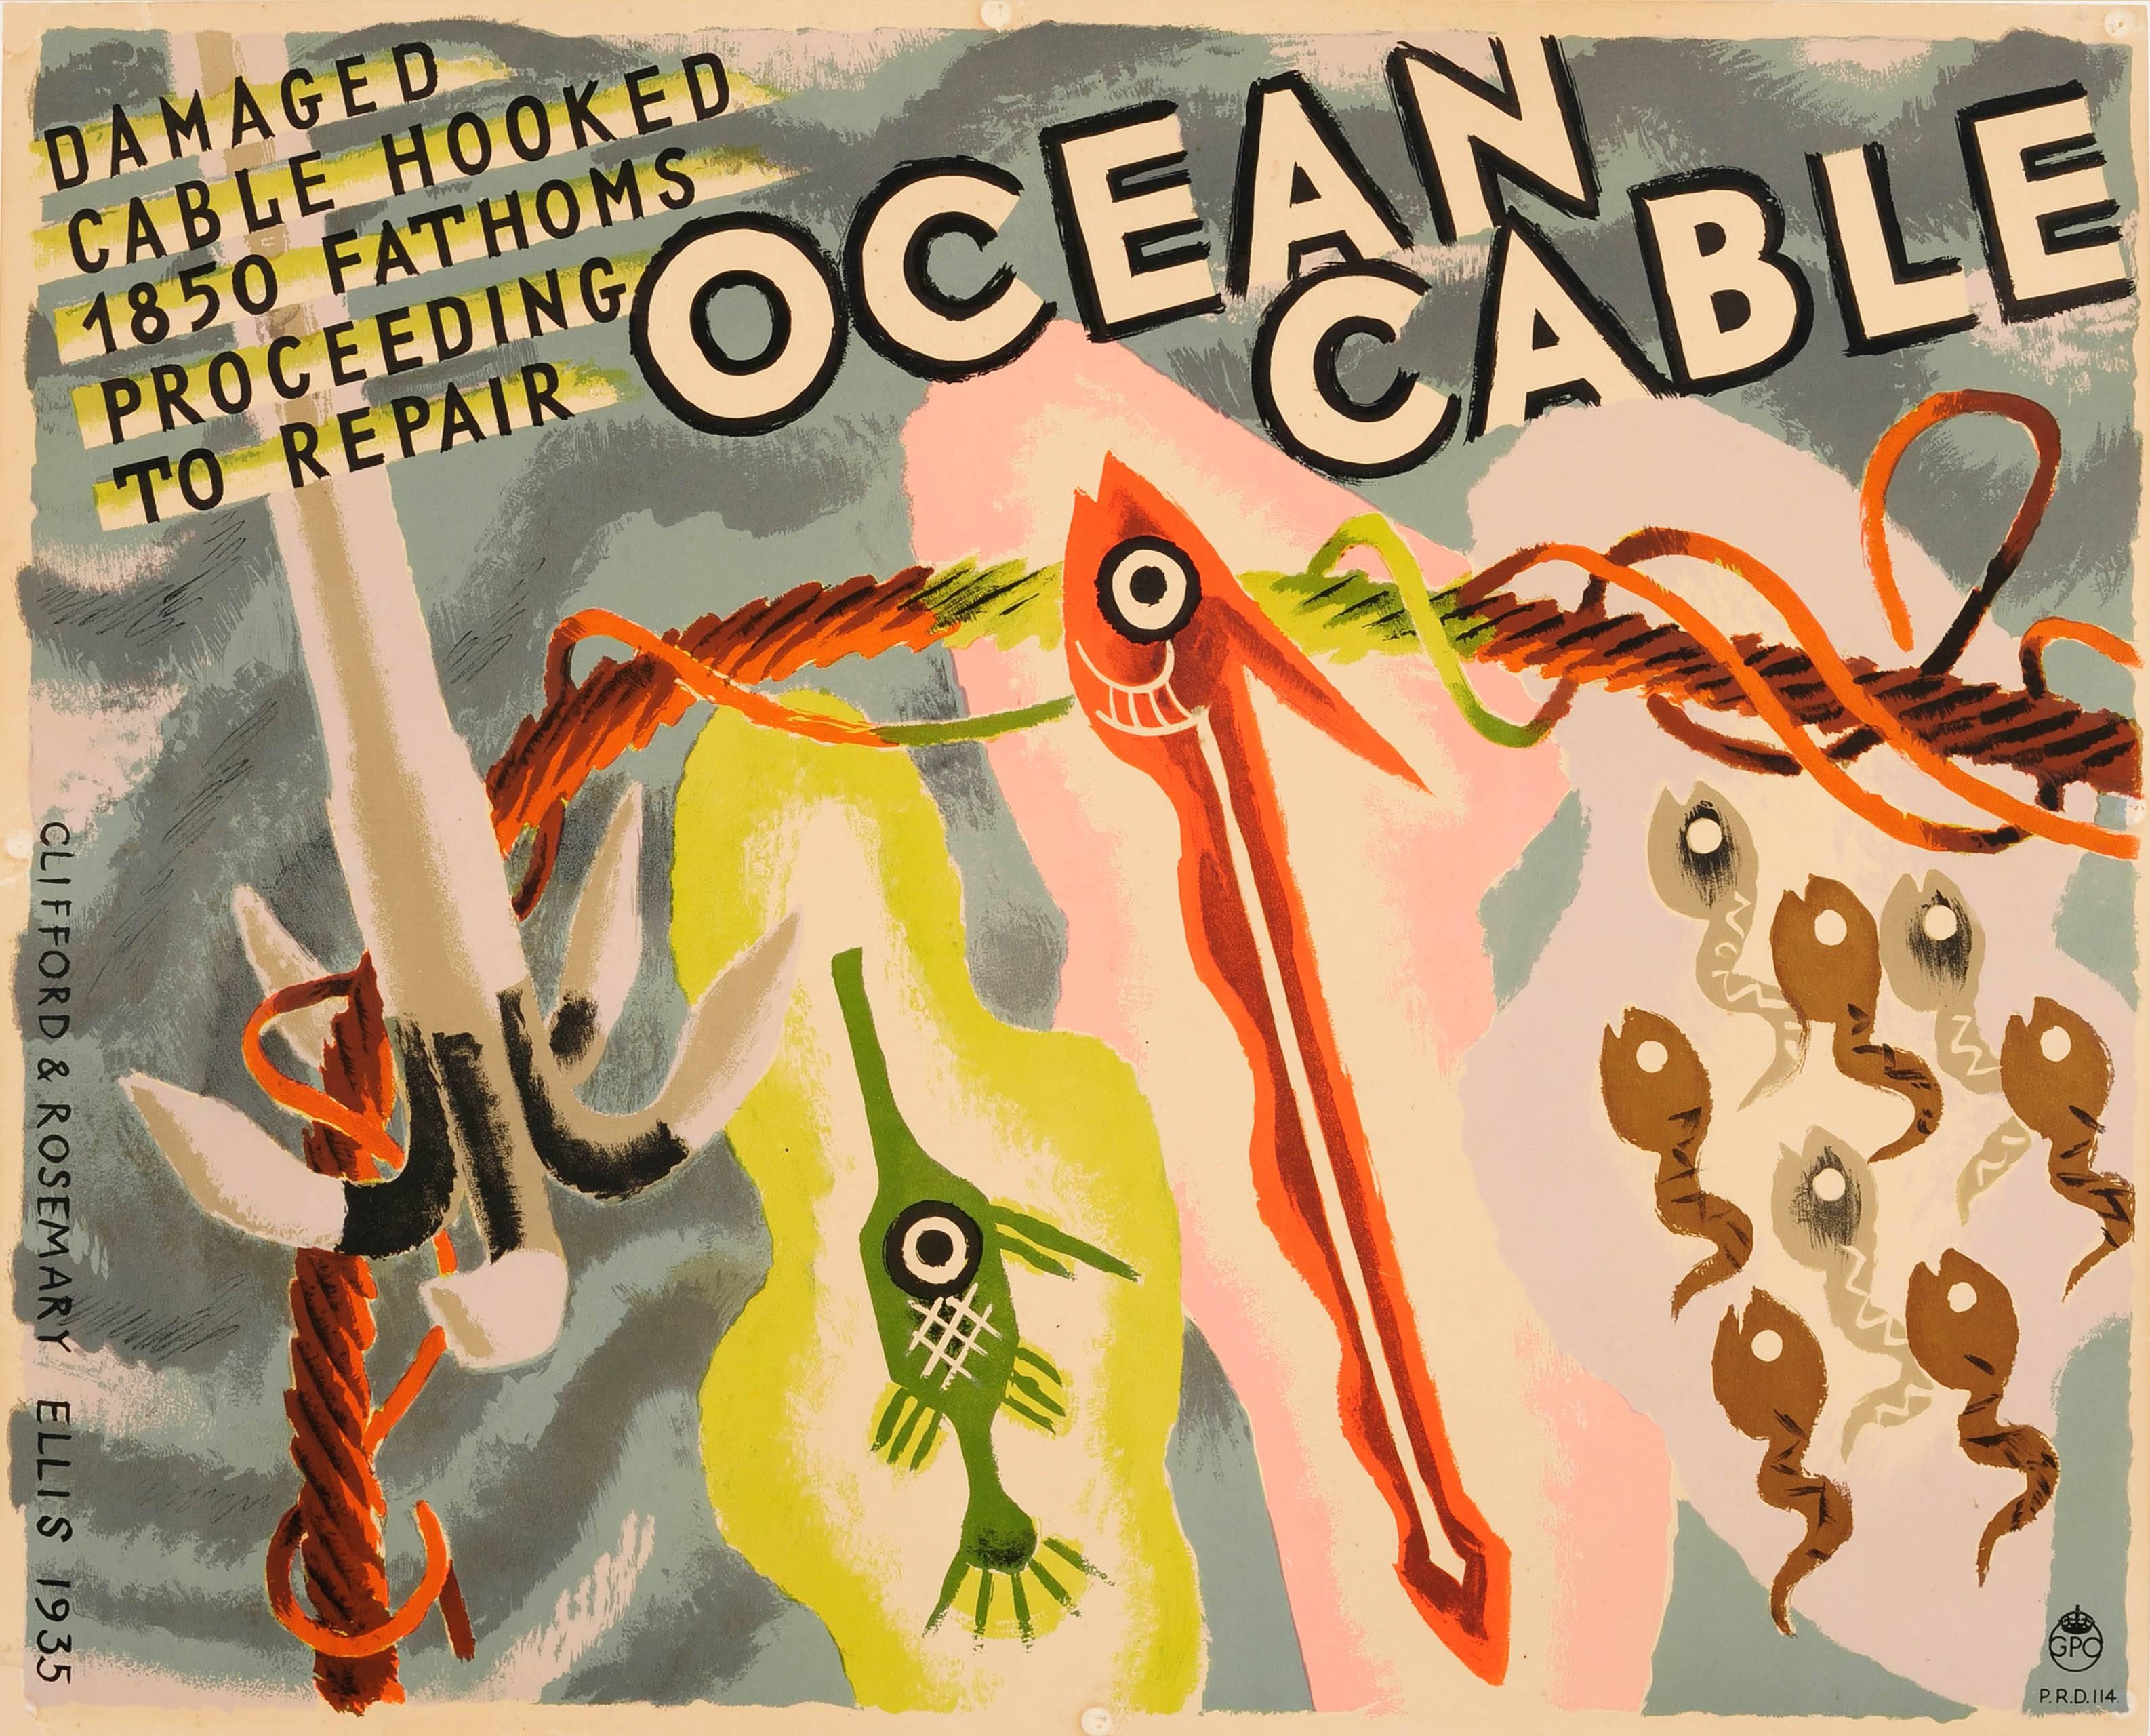 Clifford & Rosemary Ellis Print - Original 1935 GPO General Post Office Ocean Cable Poster - Damaged Cable Hooked